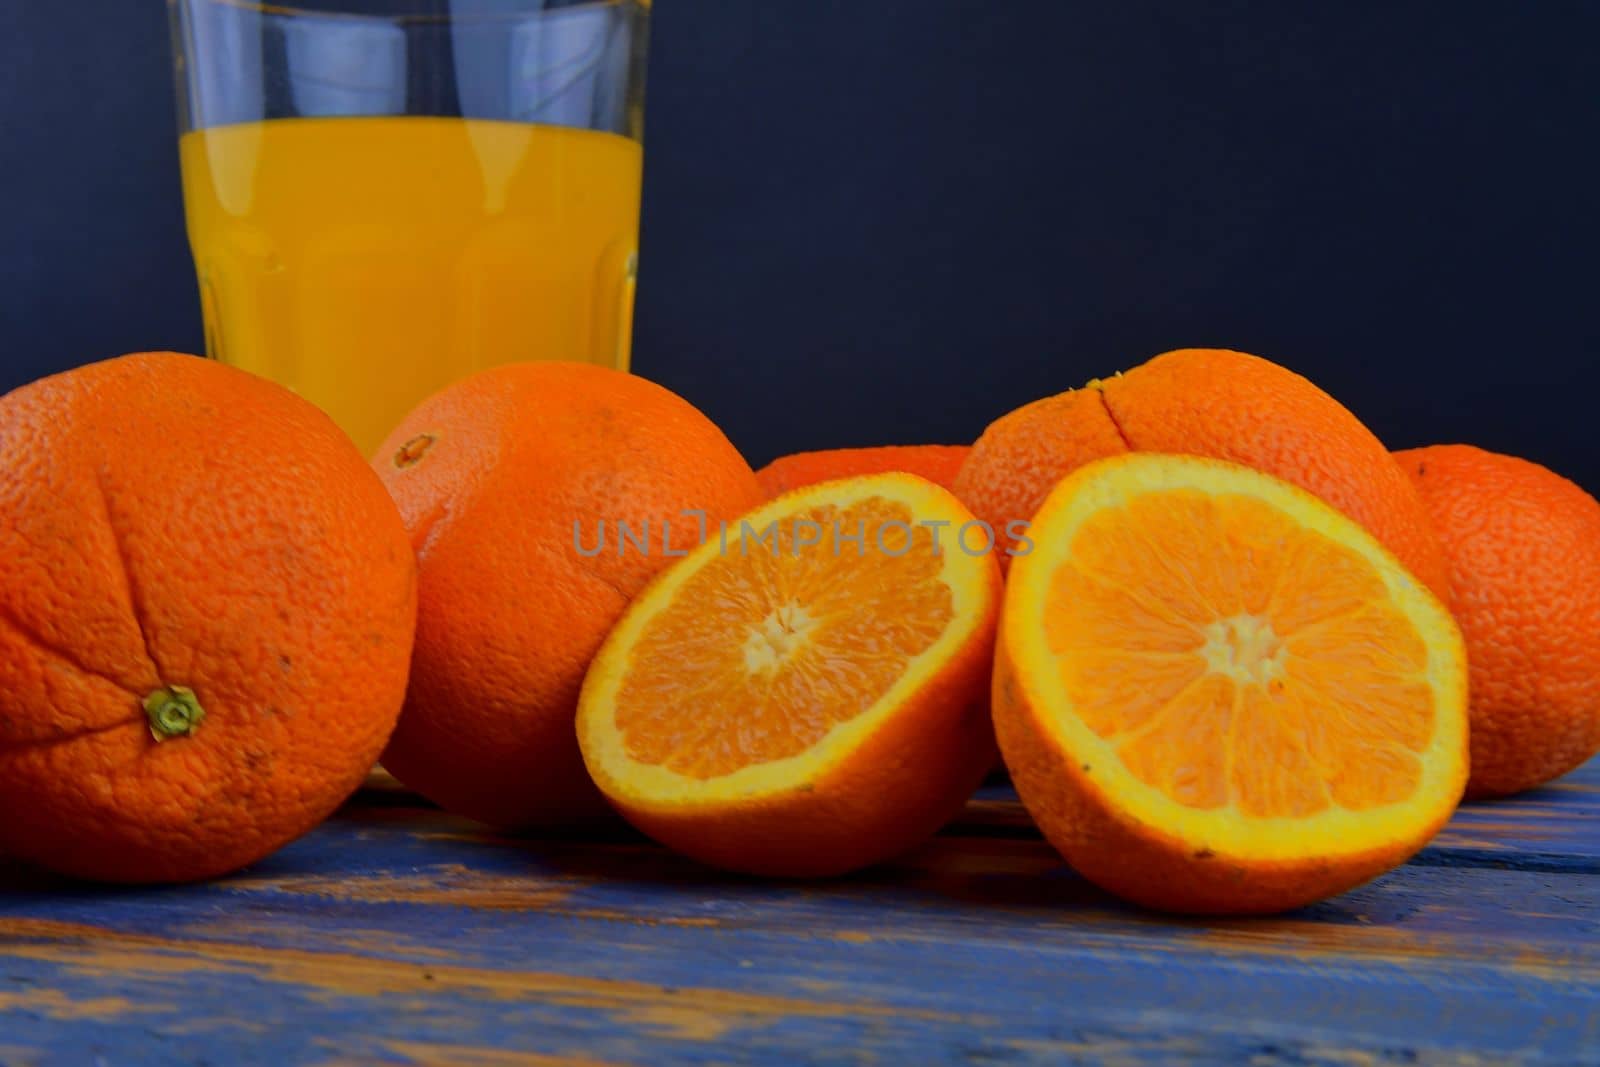 Tangerines, oranges, a glass of orange juice and manual citrus squezeer on blue wooden background. Oranges cut in half. Close-up by roman_nerud